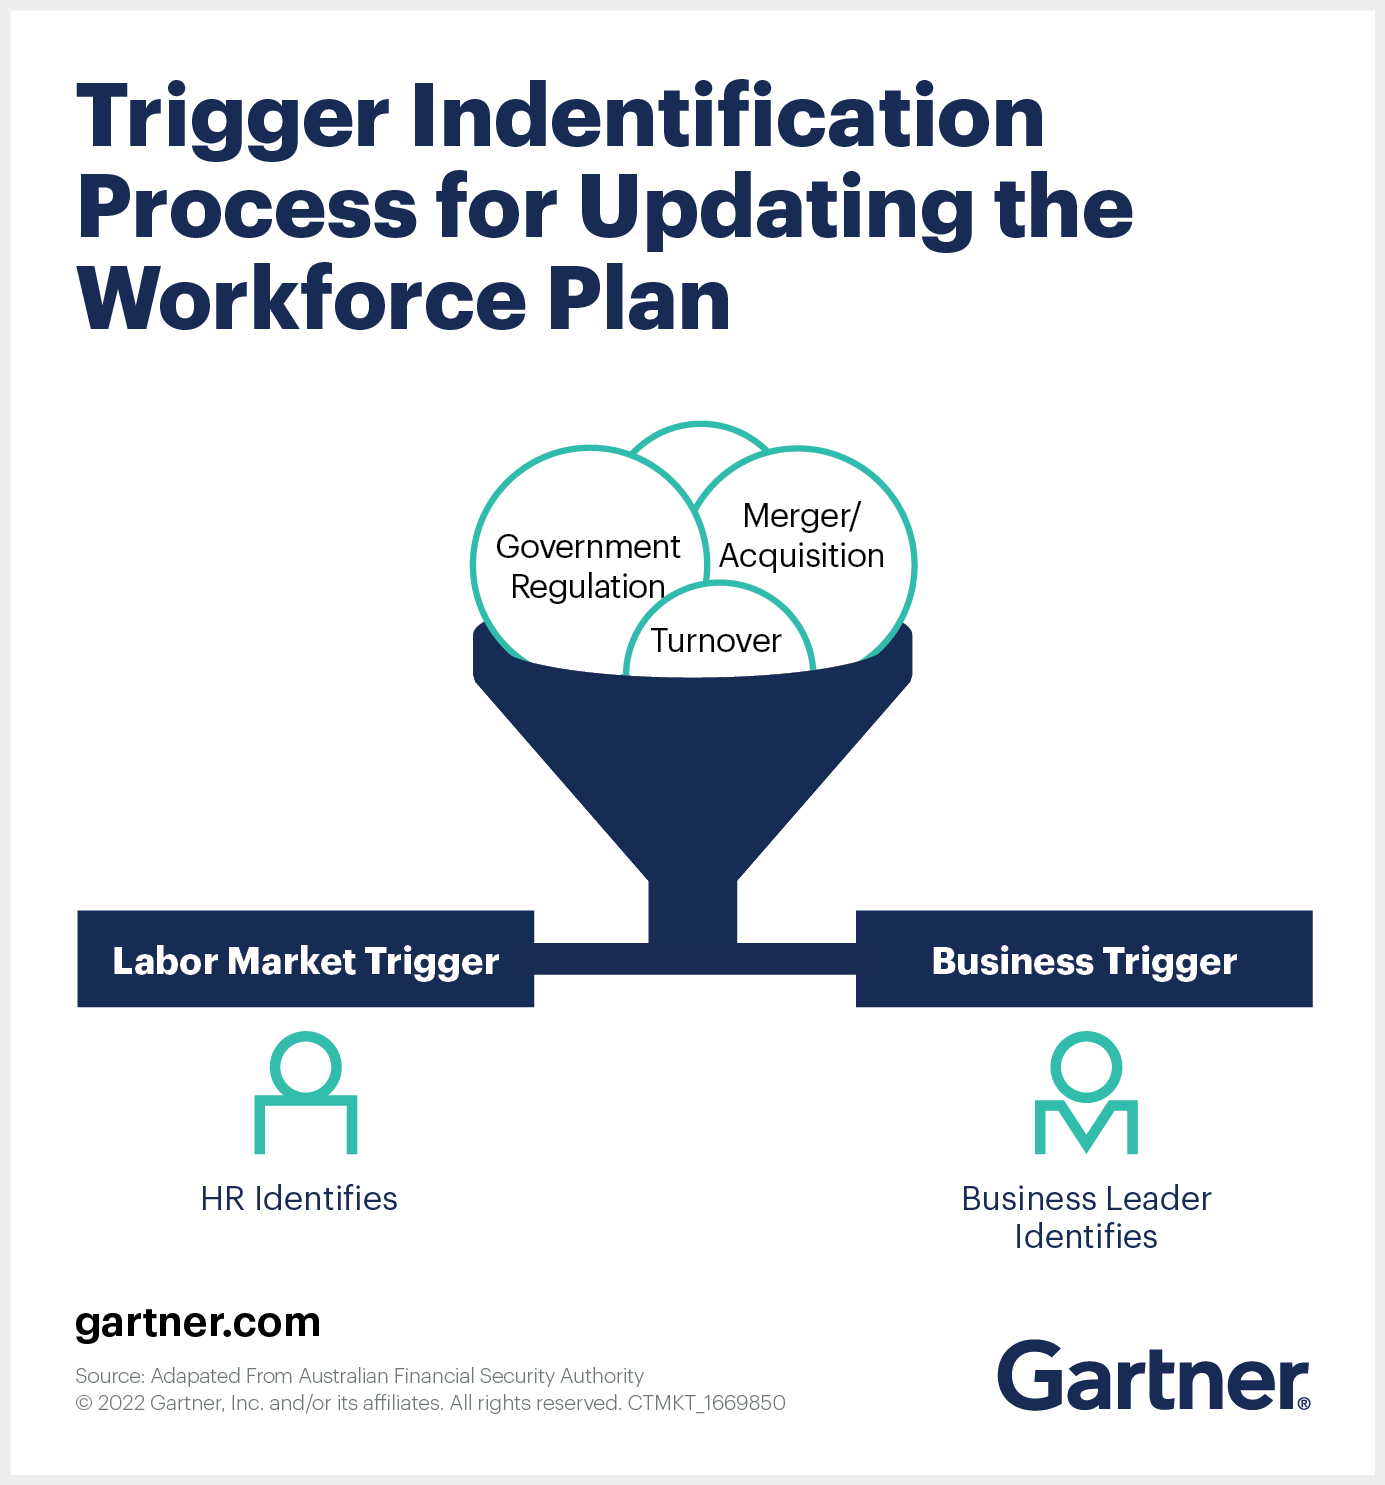 Trigger Identification Process for Updating the Workforce Plan